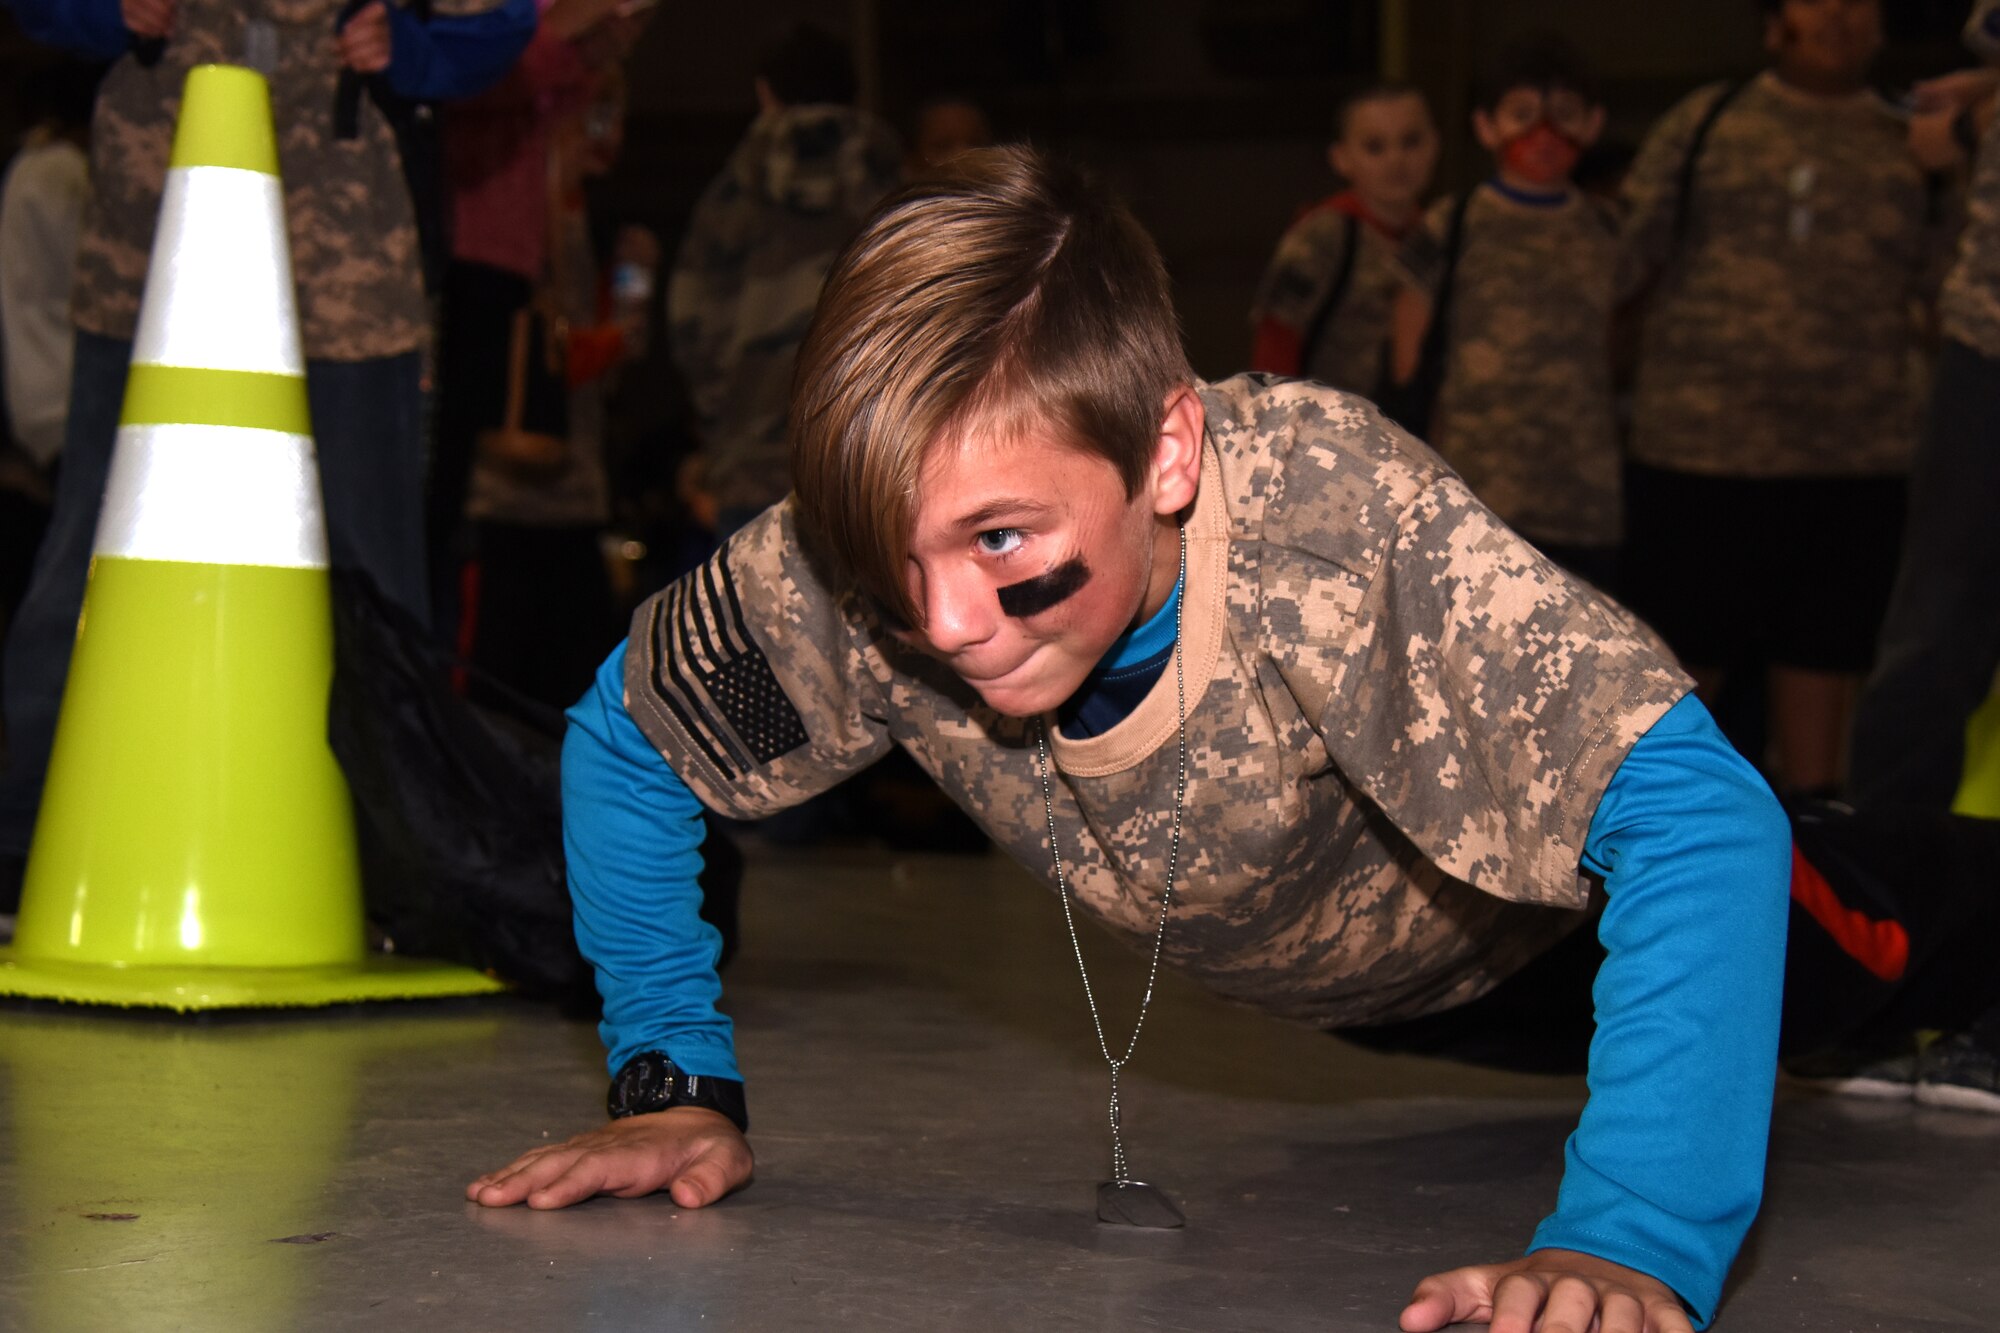 Scott, an Operation KIDS participant competes in a push-up competition while waiting for the processing of the rest of his group at the Louis F. Garland Department of Defense Fire Academy Goodfellow Air Force Base, Texas, Nov. 3, 2018. Drill instructors showed groups different parts of being in the military, including pushups, proper formation techniques and facing movements. (U.S. Air Force photo by Airman 1st Class Seraiah Hines/Released)